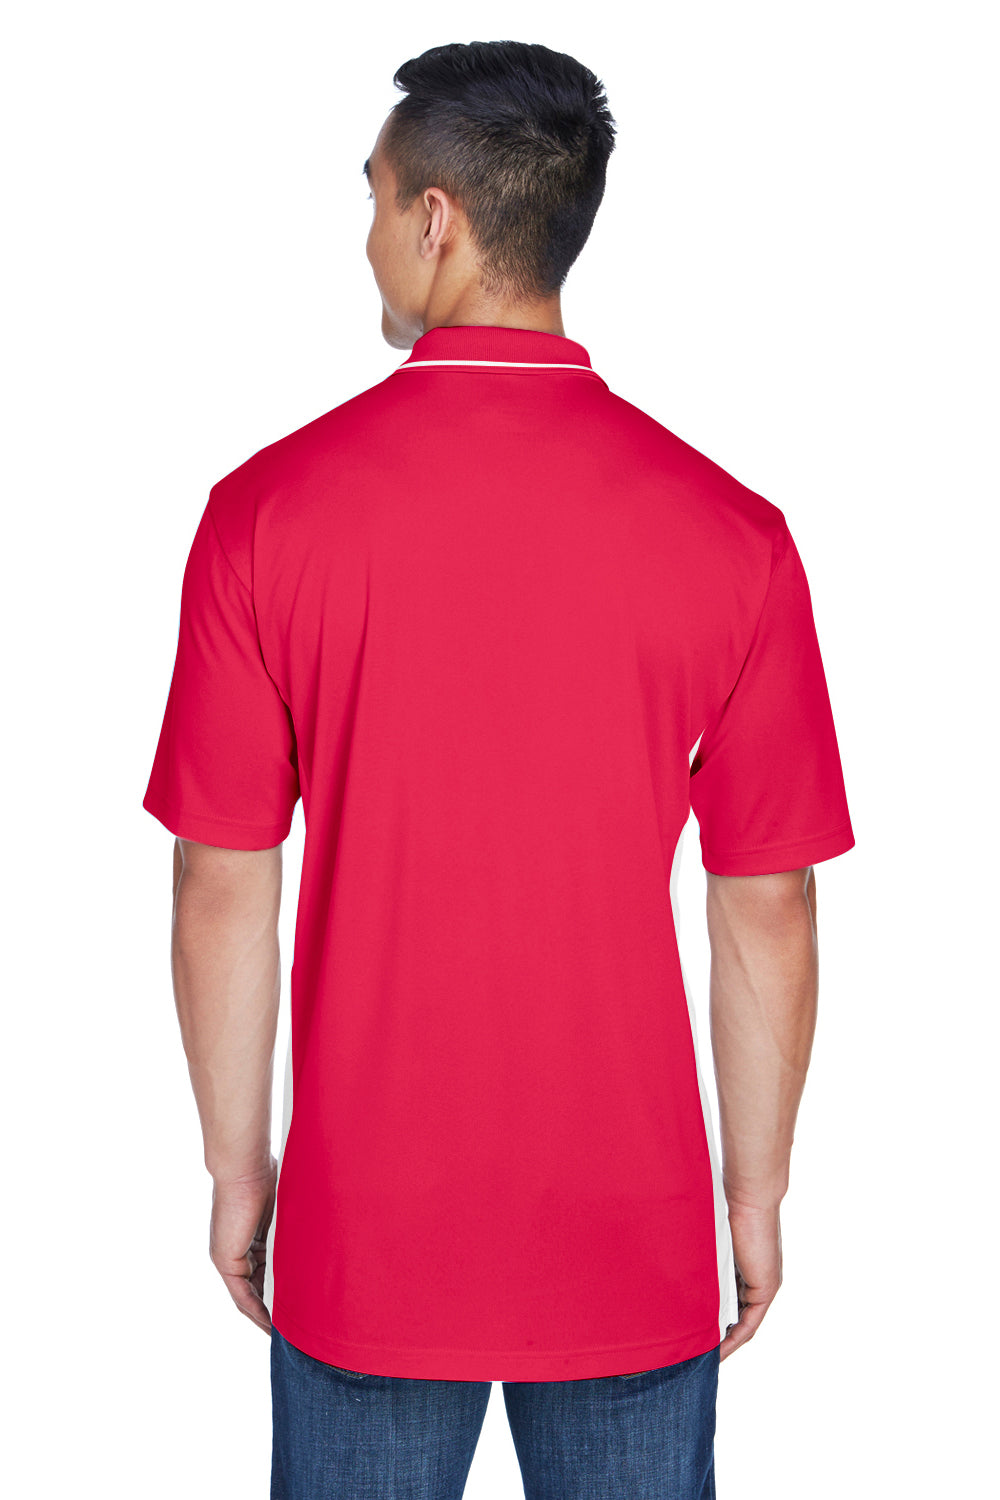 UltraClub 8406 Mens Cool & Dry Moisture Wicking Short Sleeve Polo Shirt Red/White Back